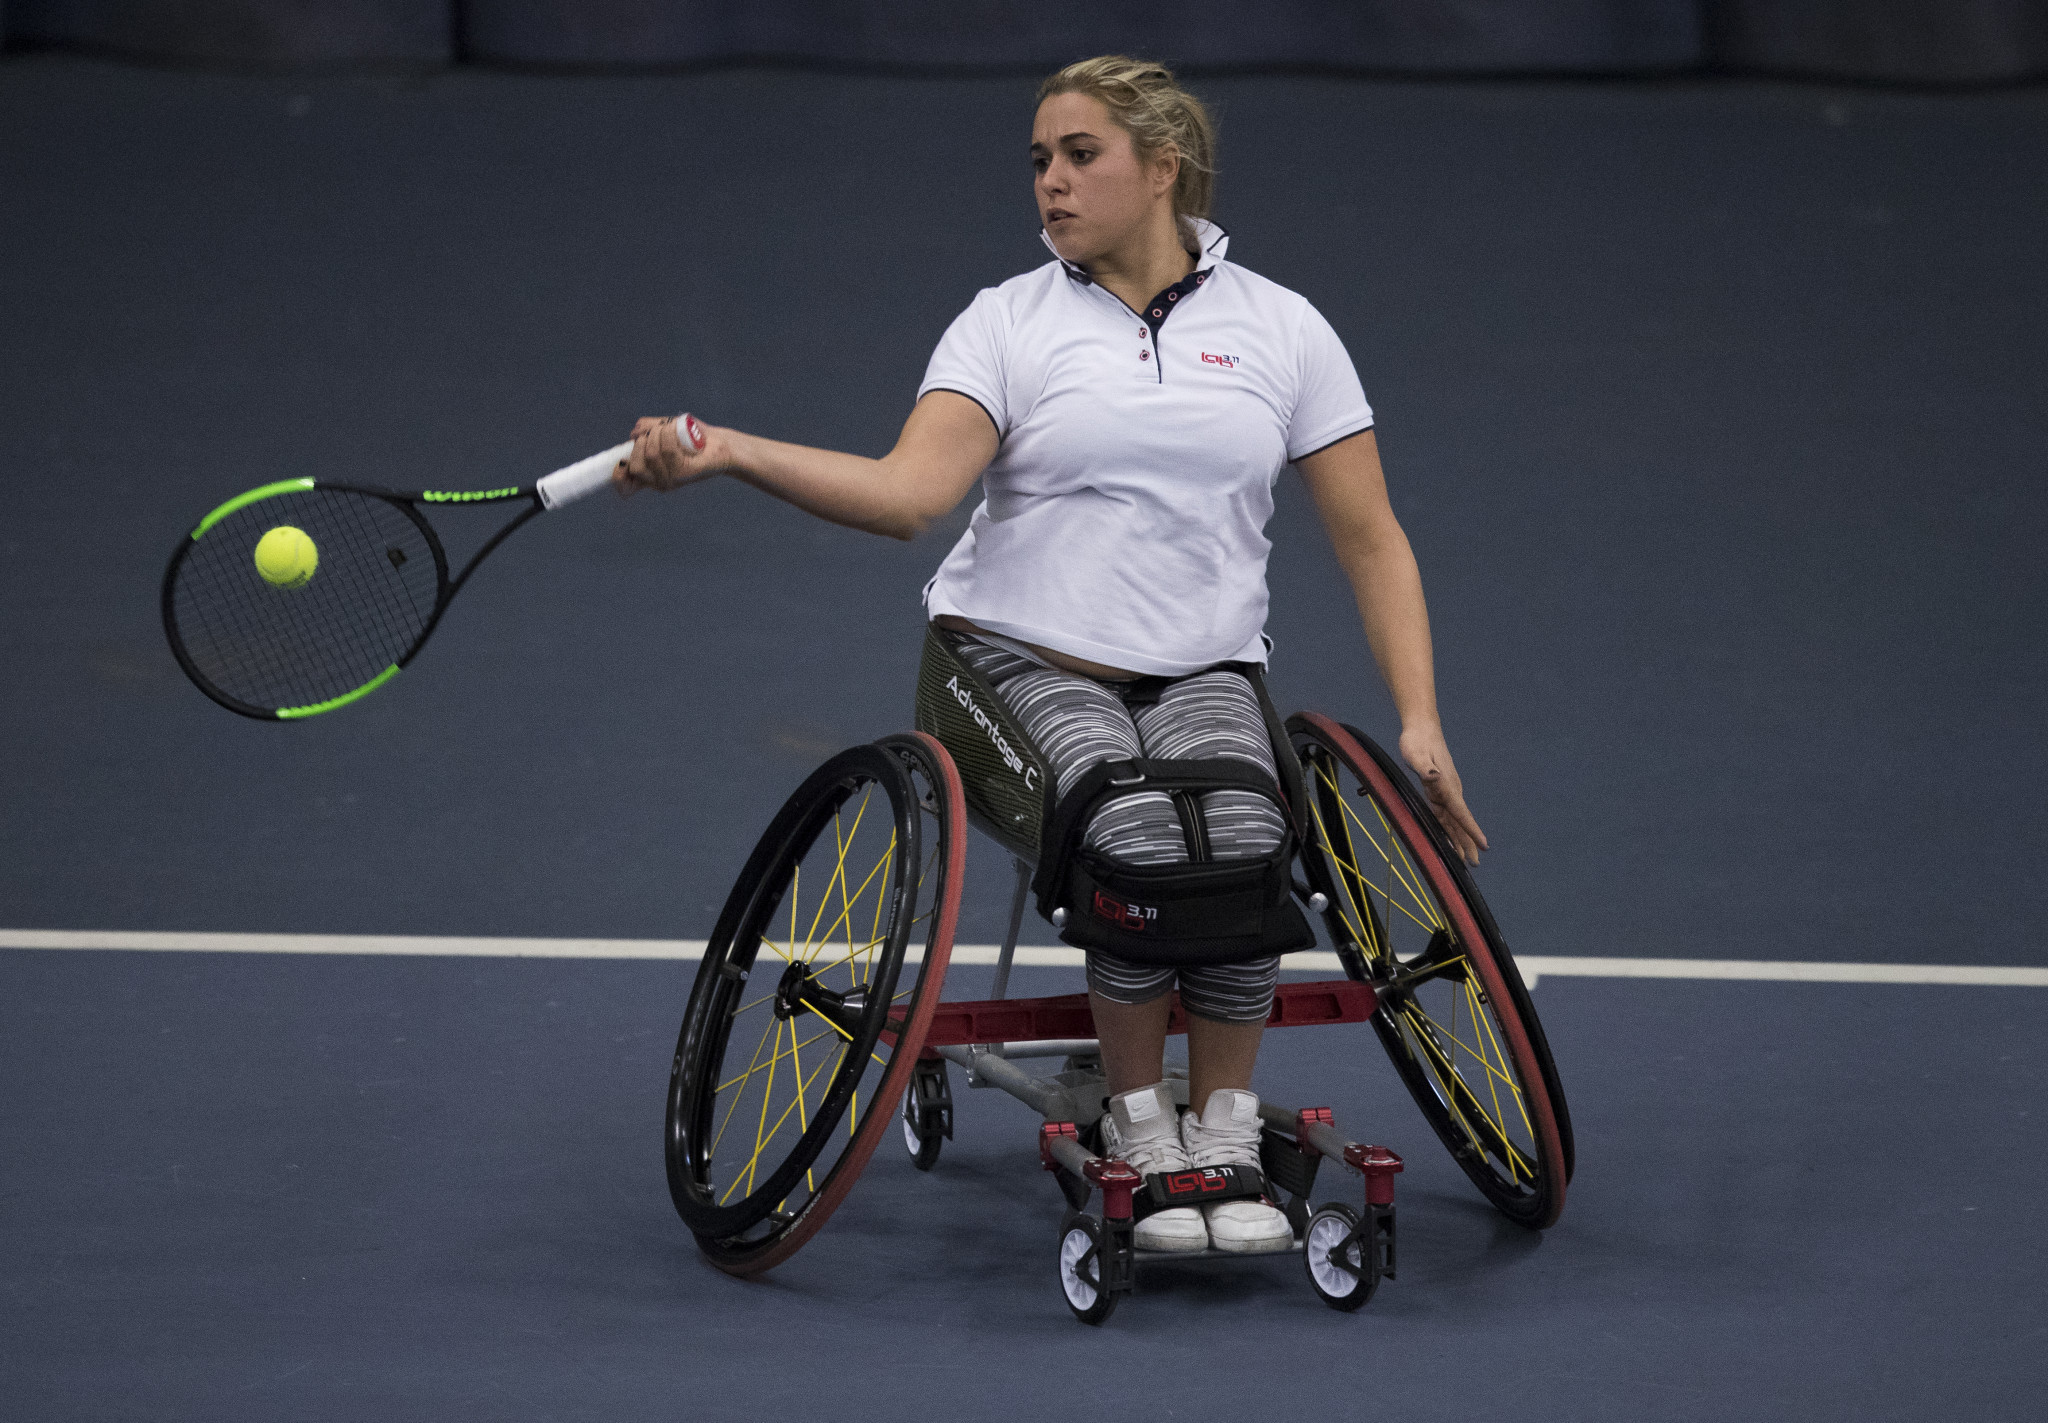 Capocci earns women's singles semi-final place at Wheelchair Tennis Masters in Orlando